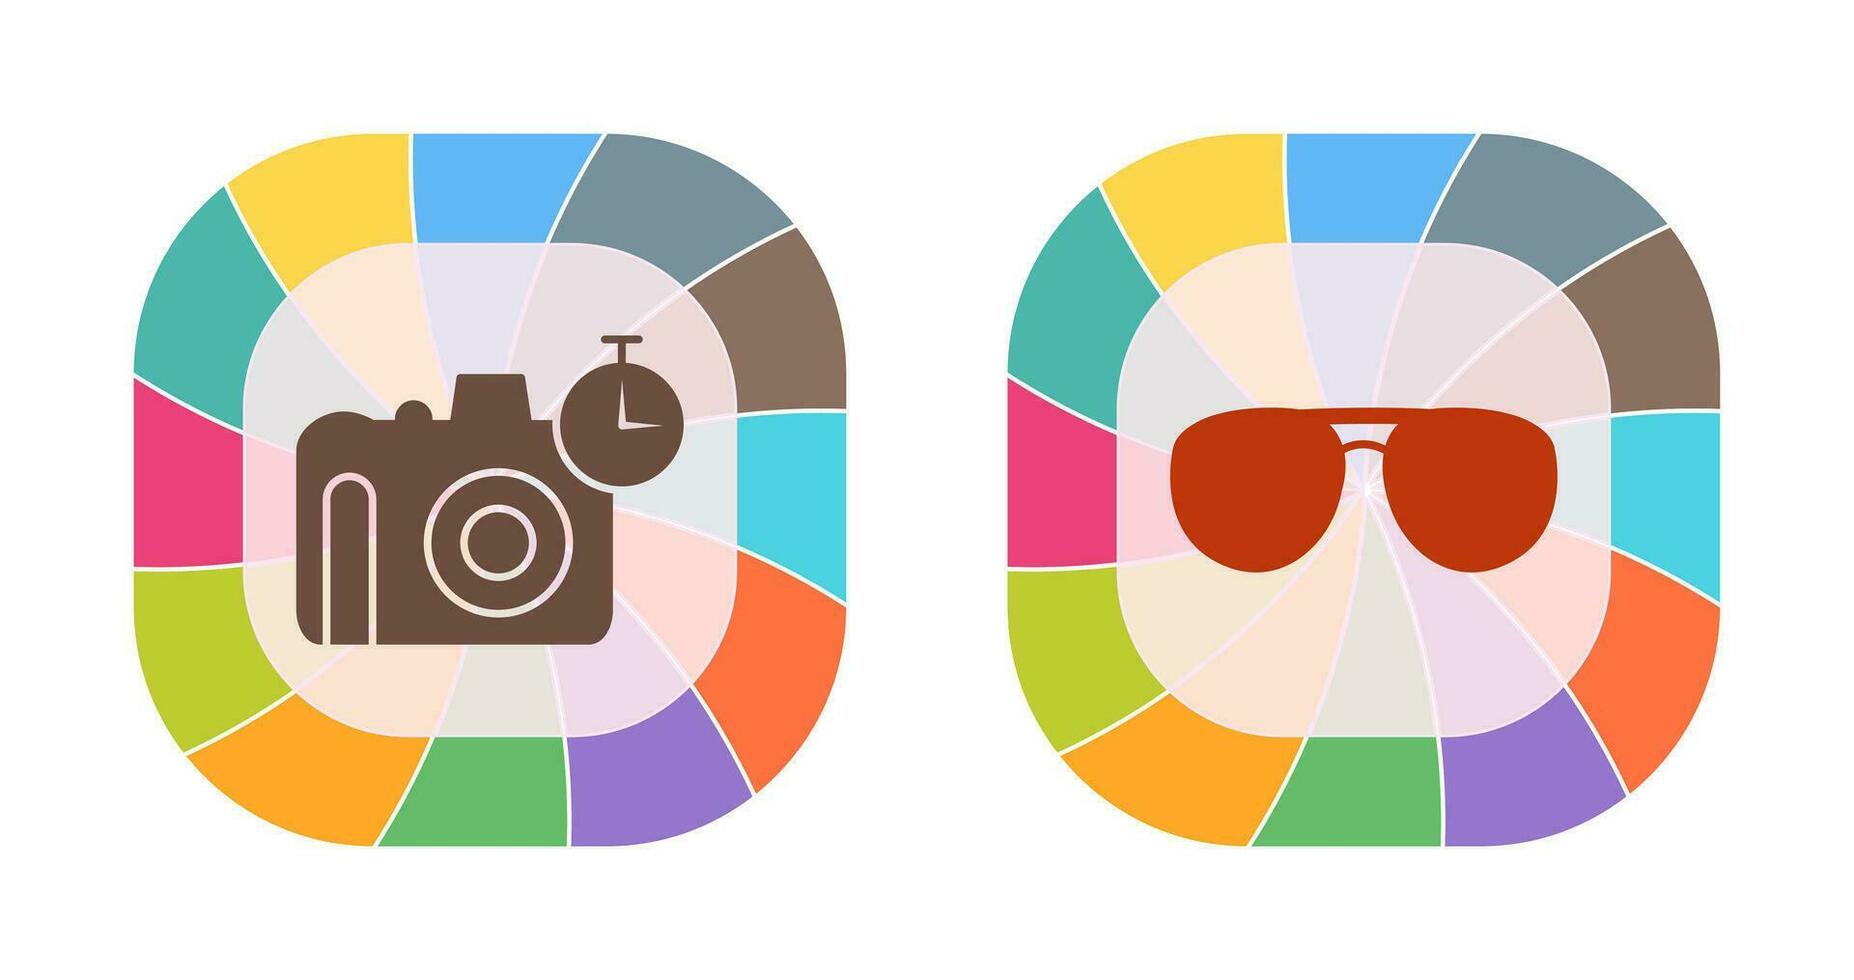 glasses and timer on camera Icon vector